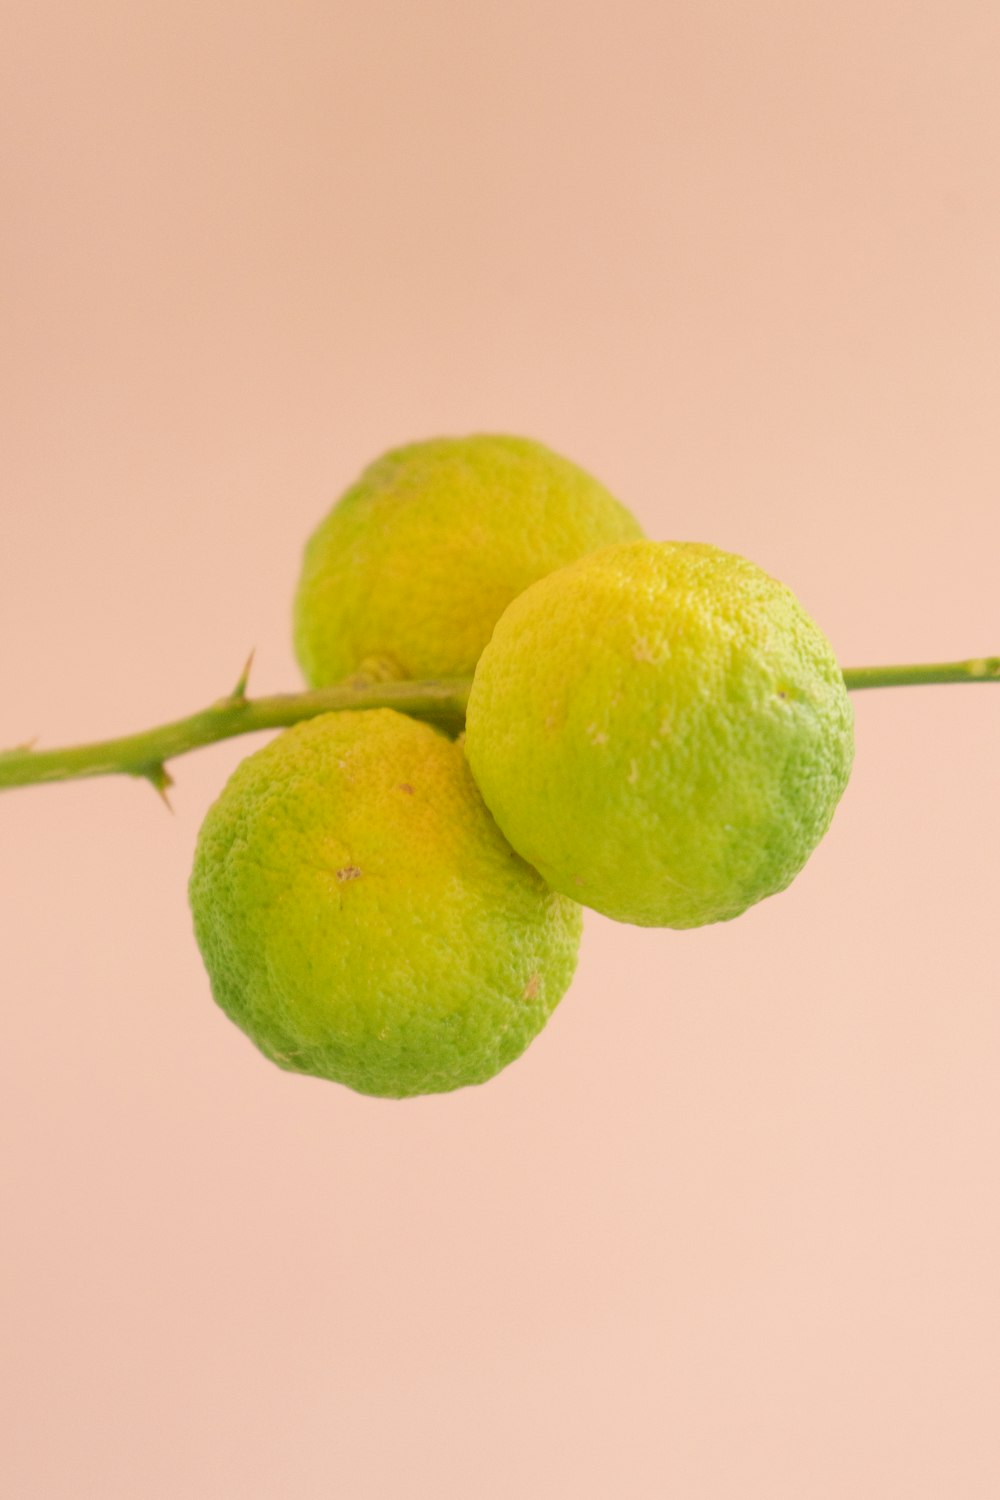 two yellow fruits on pink background